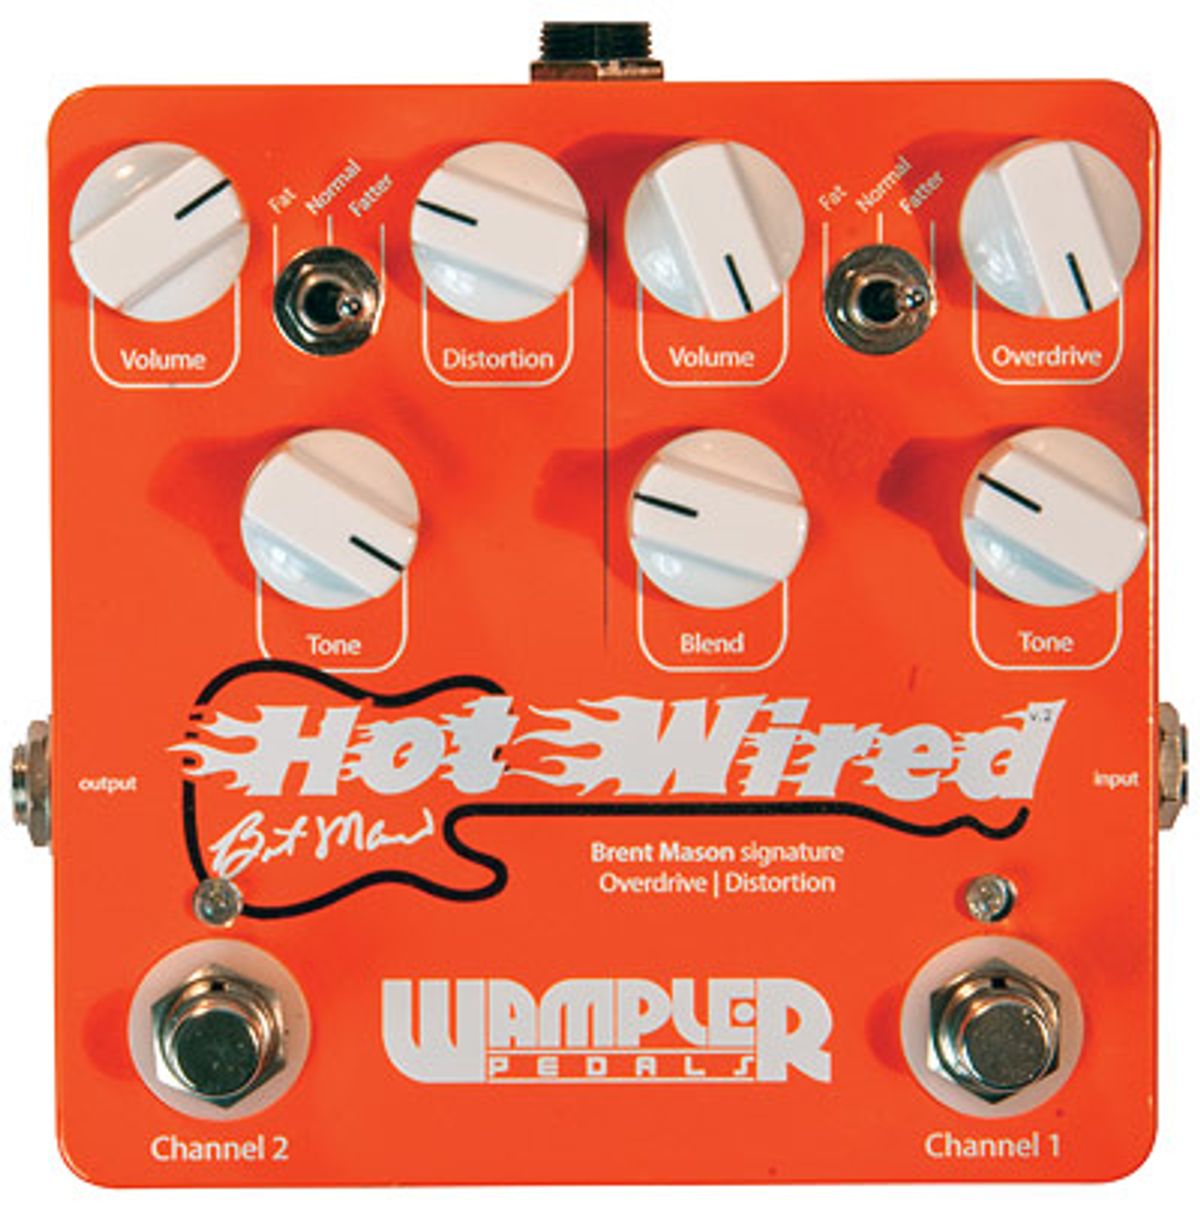 Wampler Pedals Brent Mason Hot Wired v.2 Pedal Review